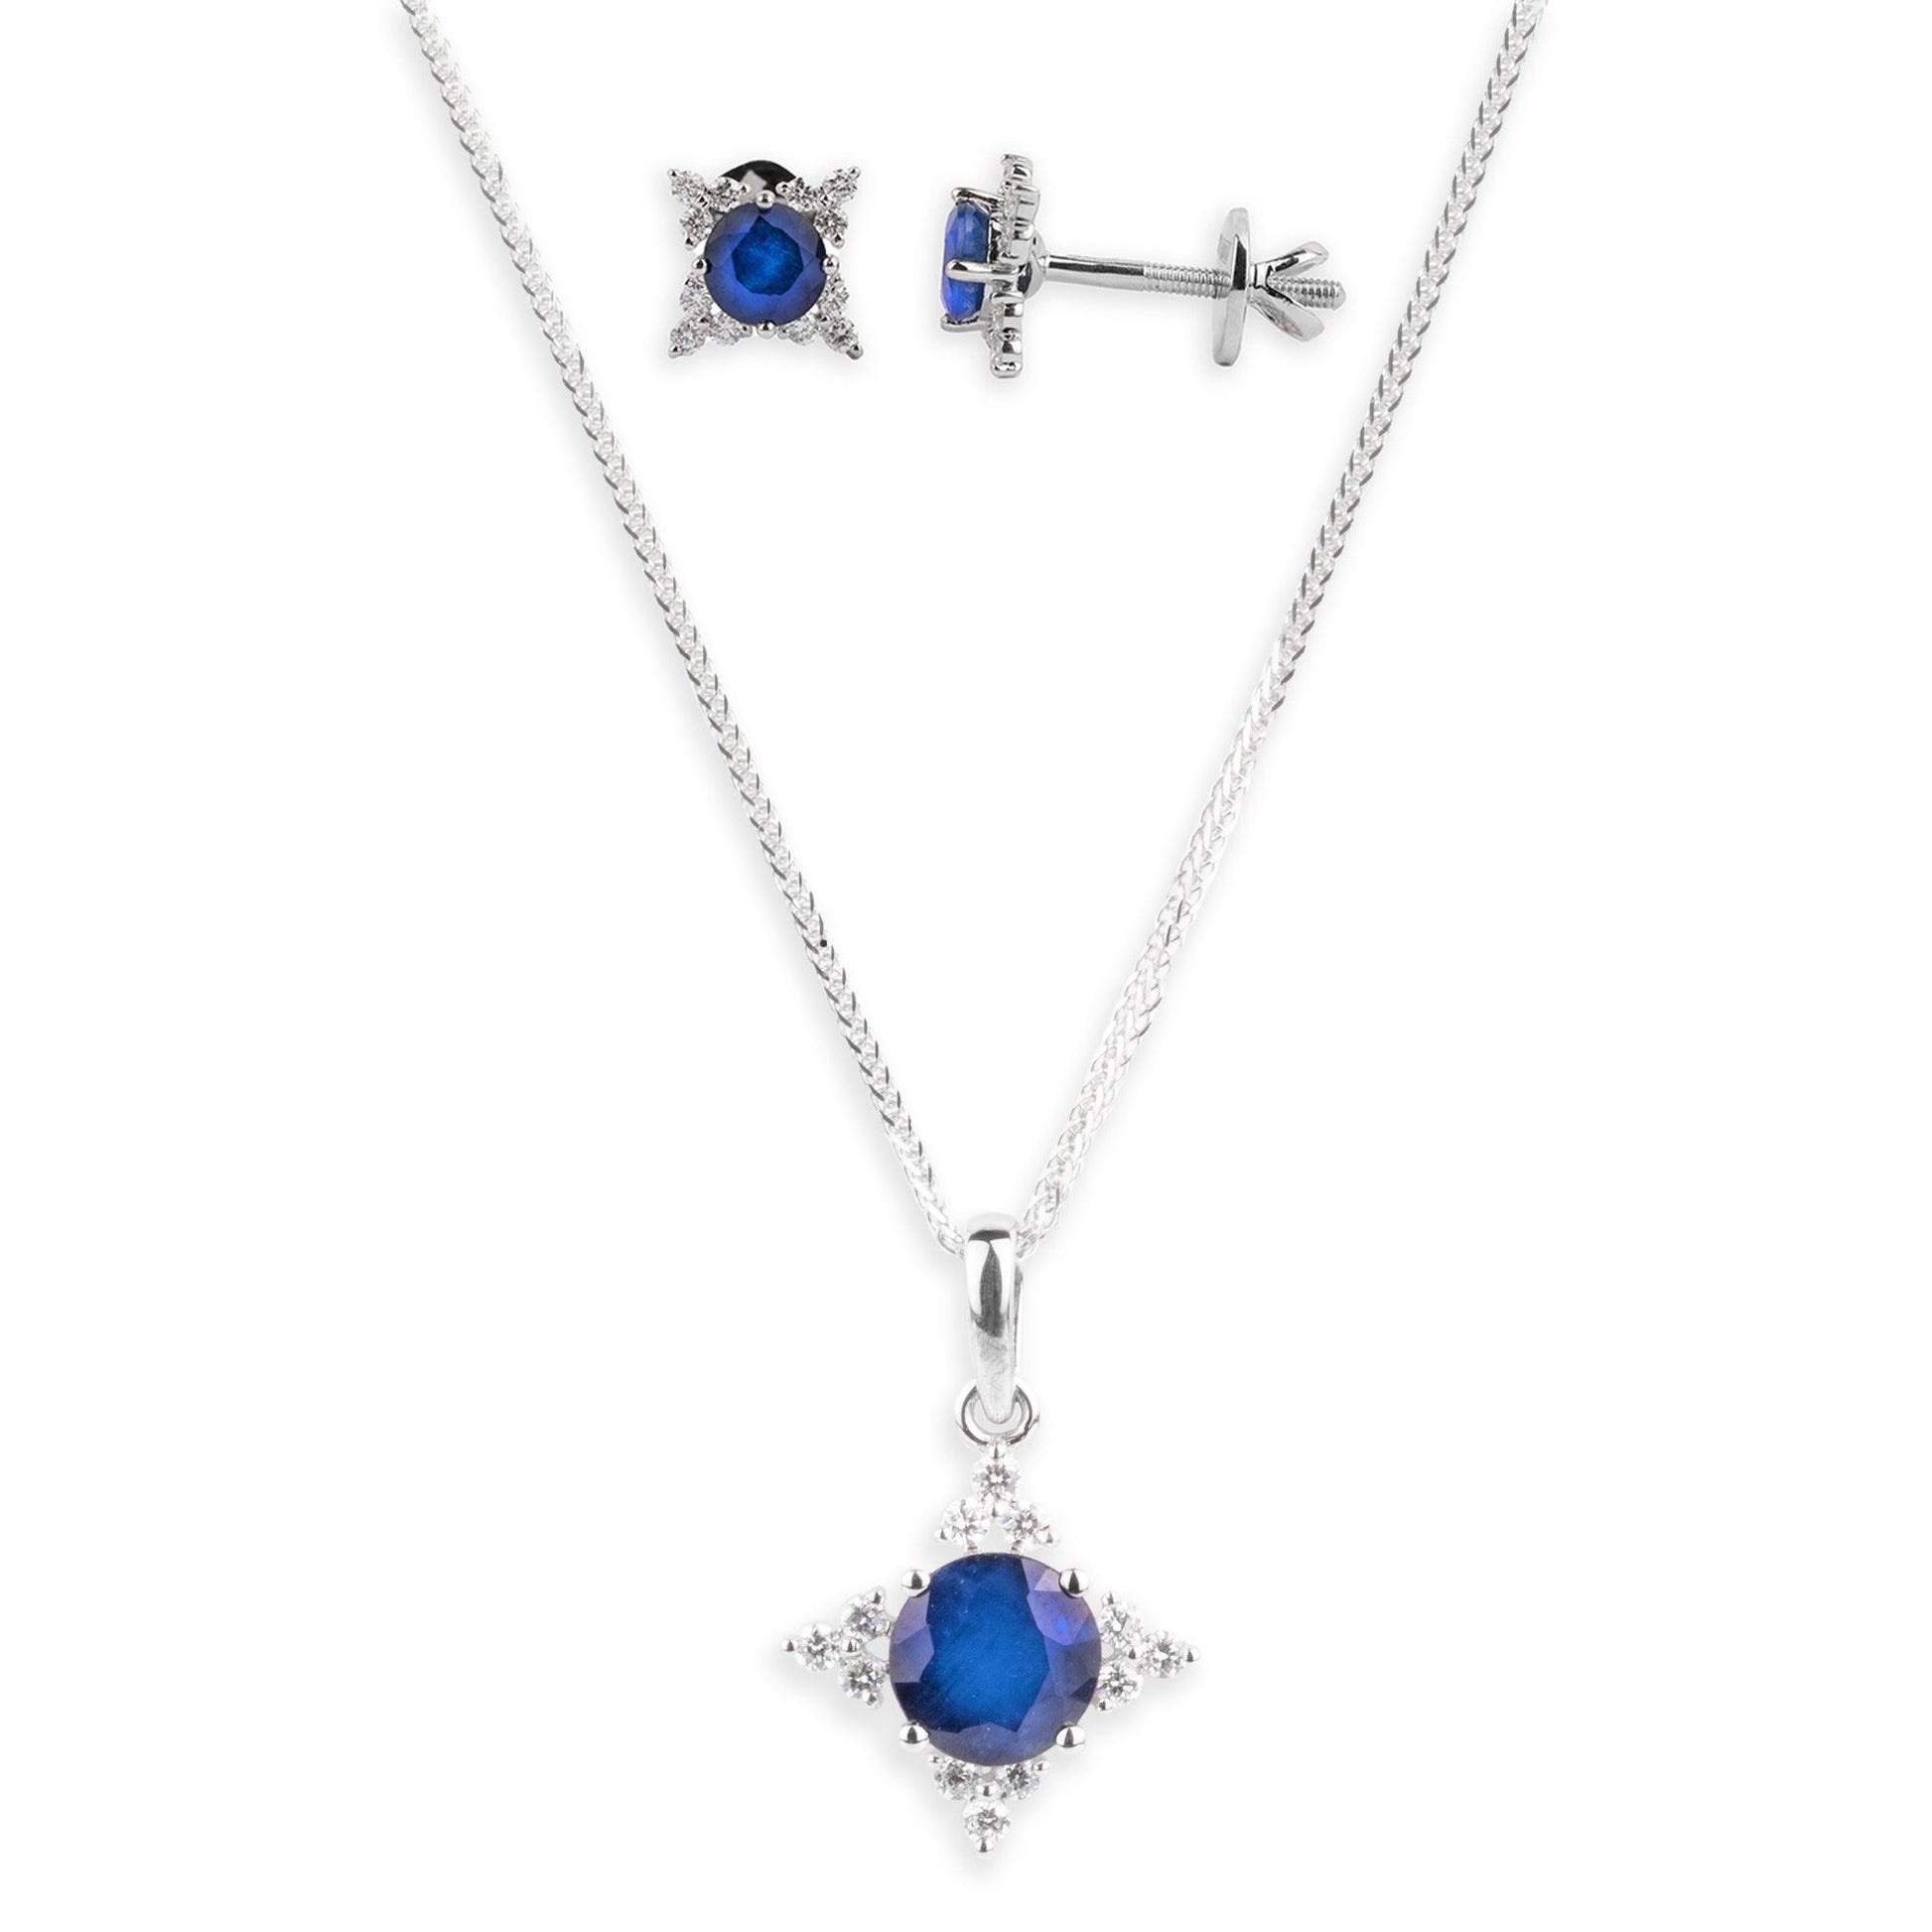 18ct White Gold Diamond and Blue Sapphire Pendant and Earrings Set CH-06819 MCS4845 MCS4846 - Minar Jewellers